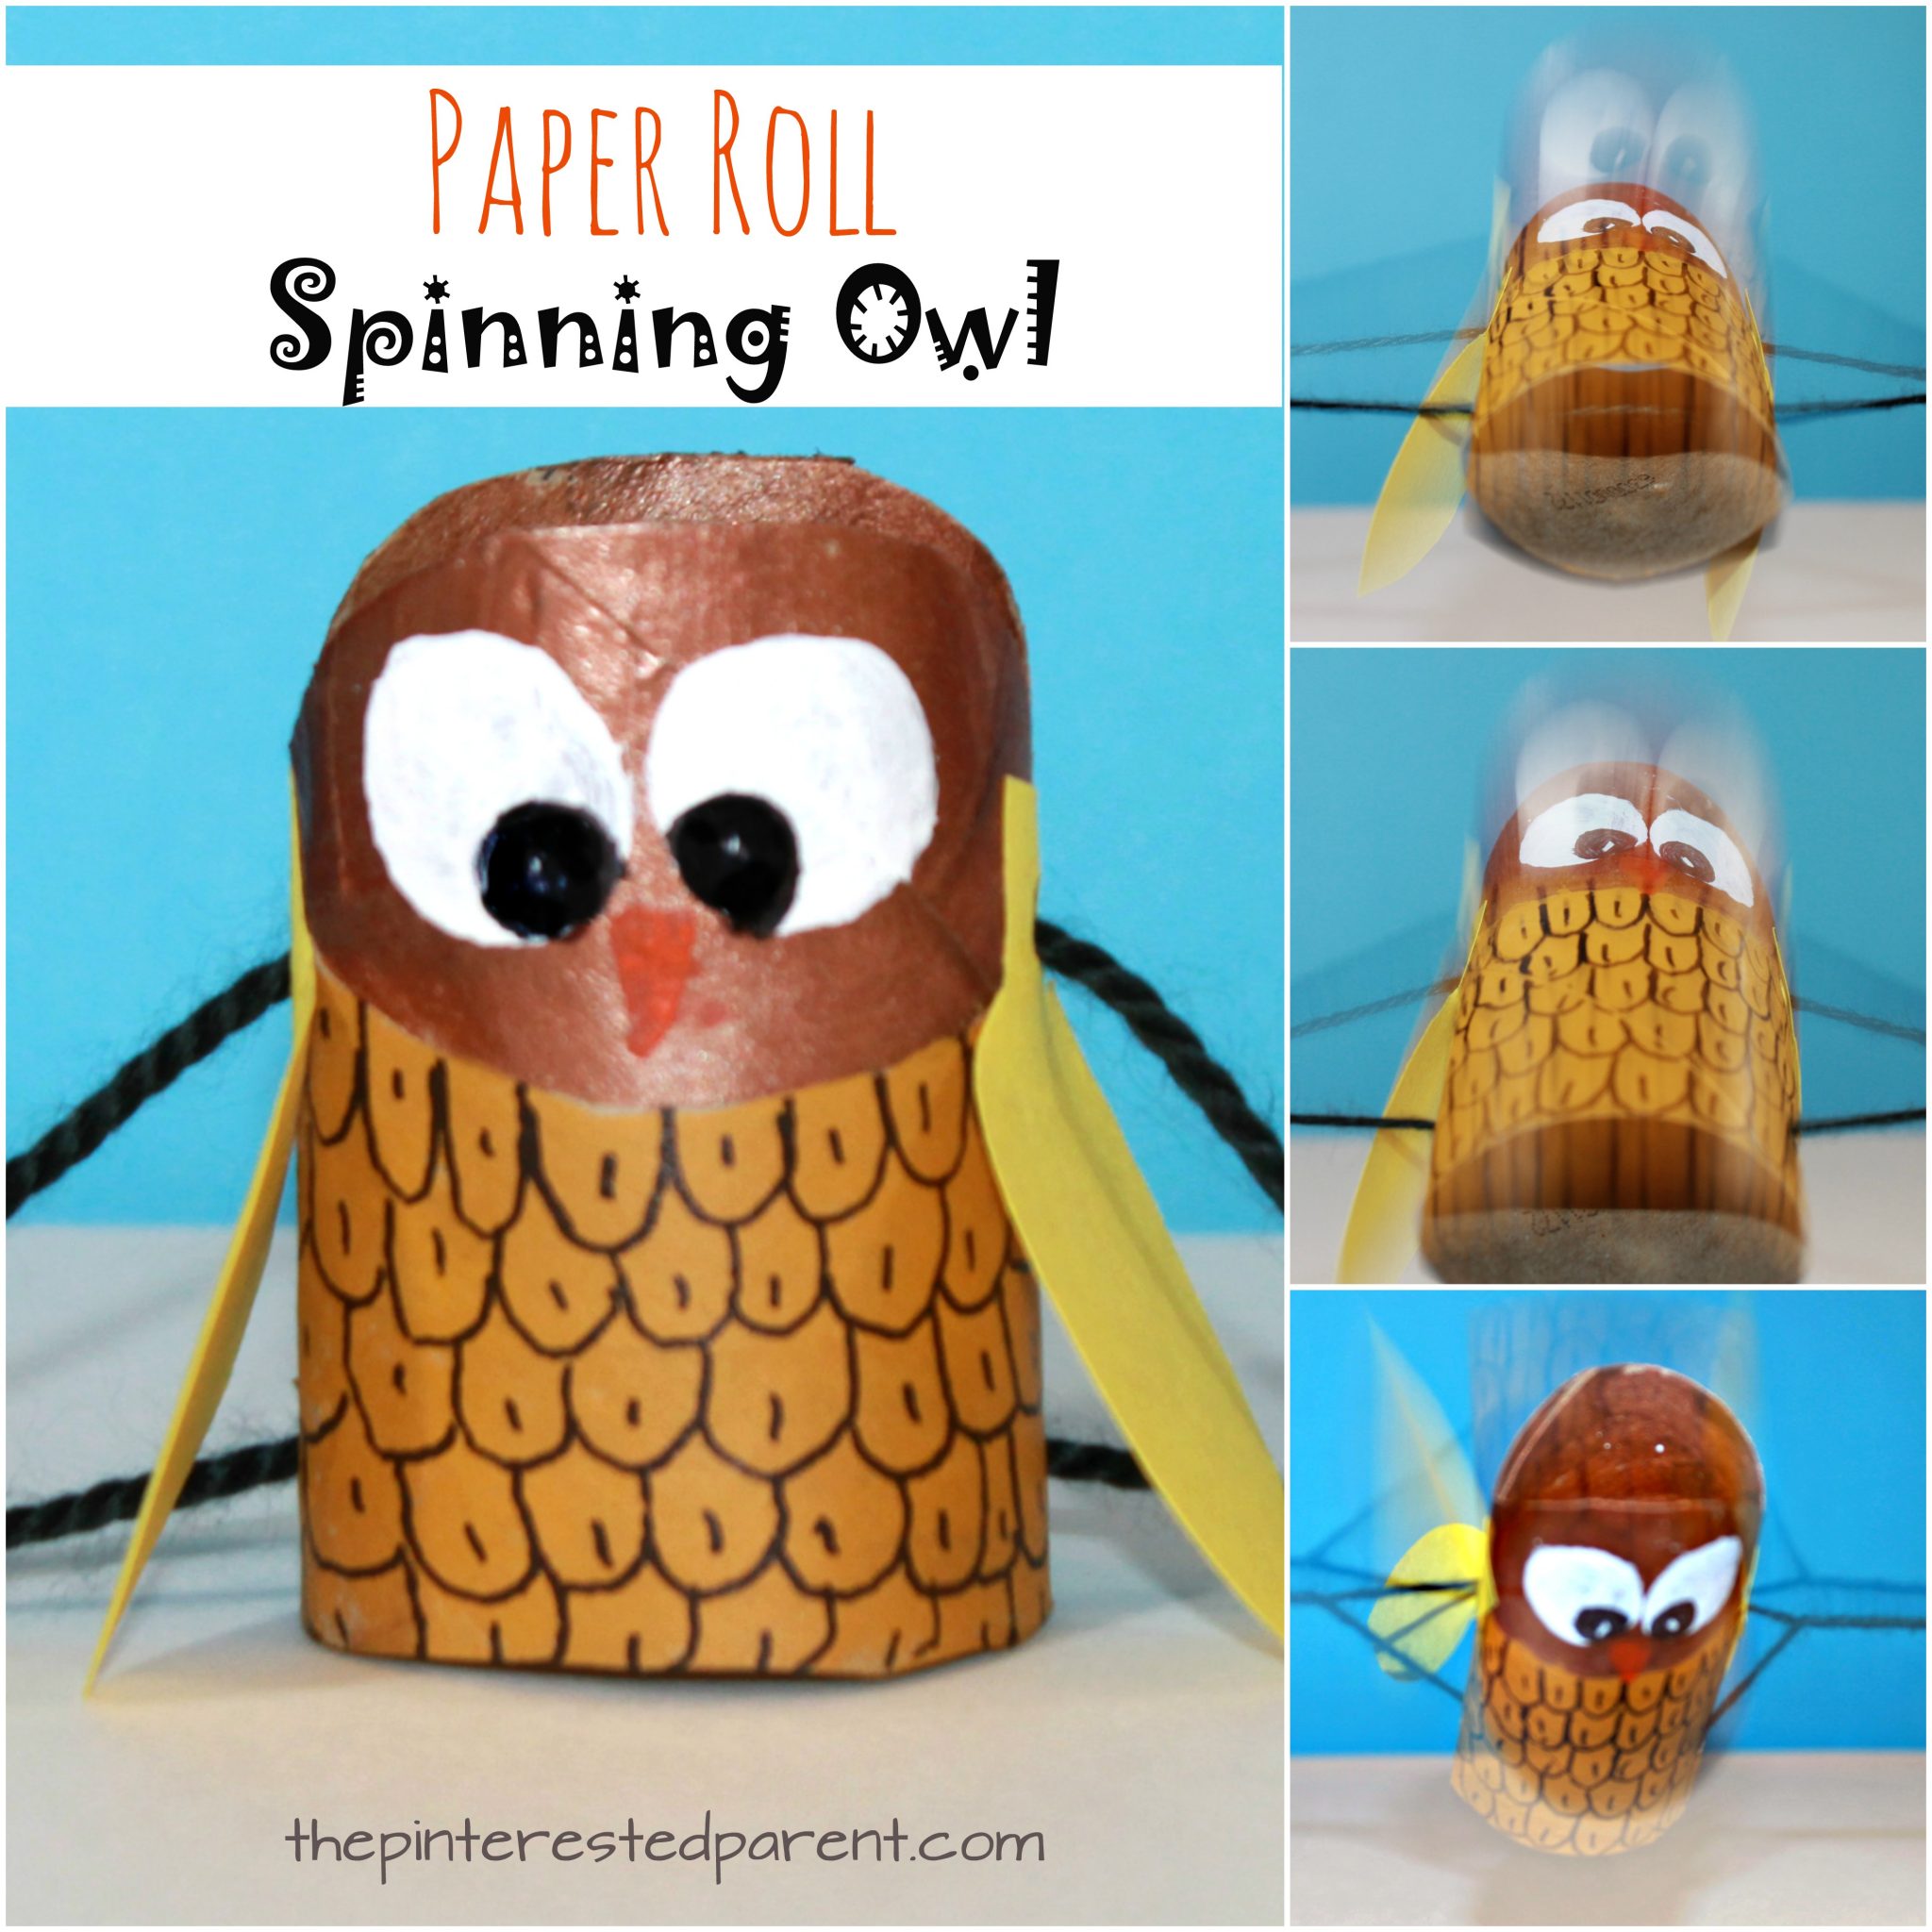 Paper roll spinning owl craft - Use a recycled paper towel or toilet paper roll to make these adorable spinners. Arts and crafts for kids. with recyclables.